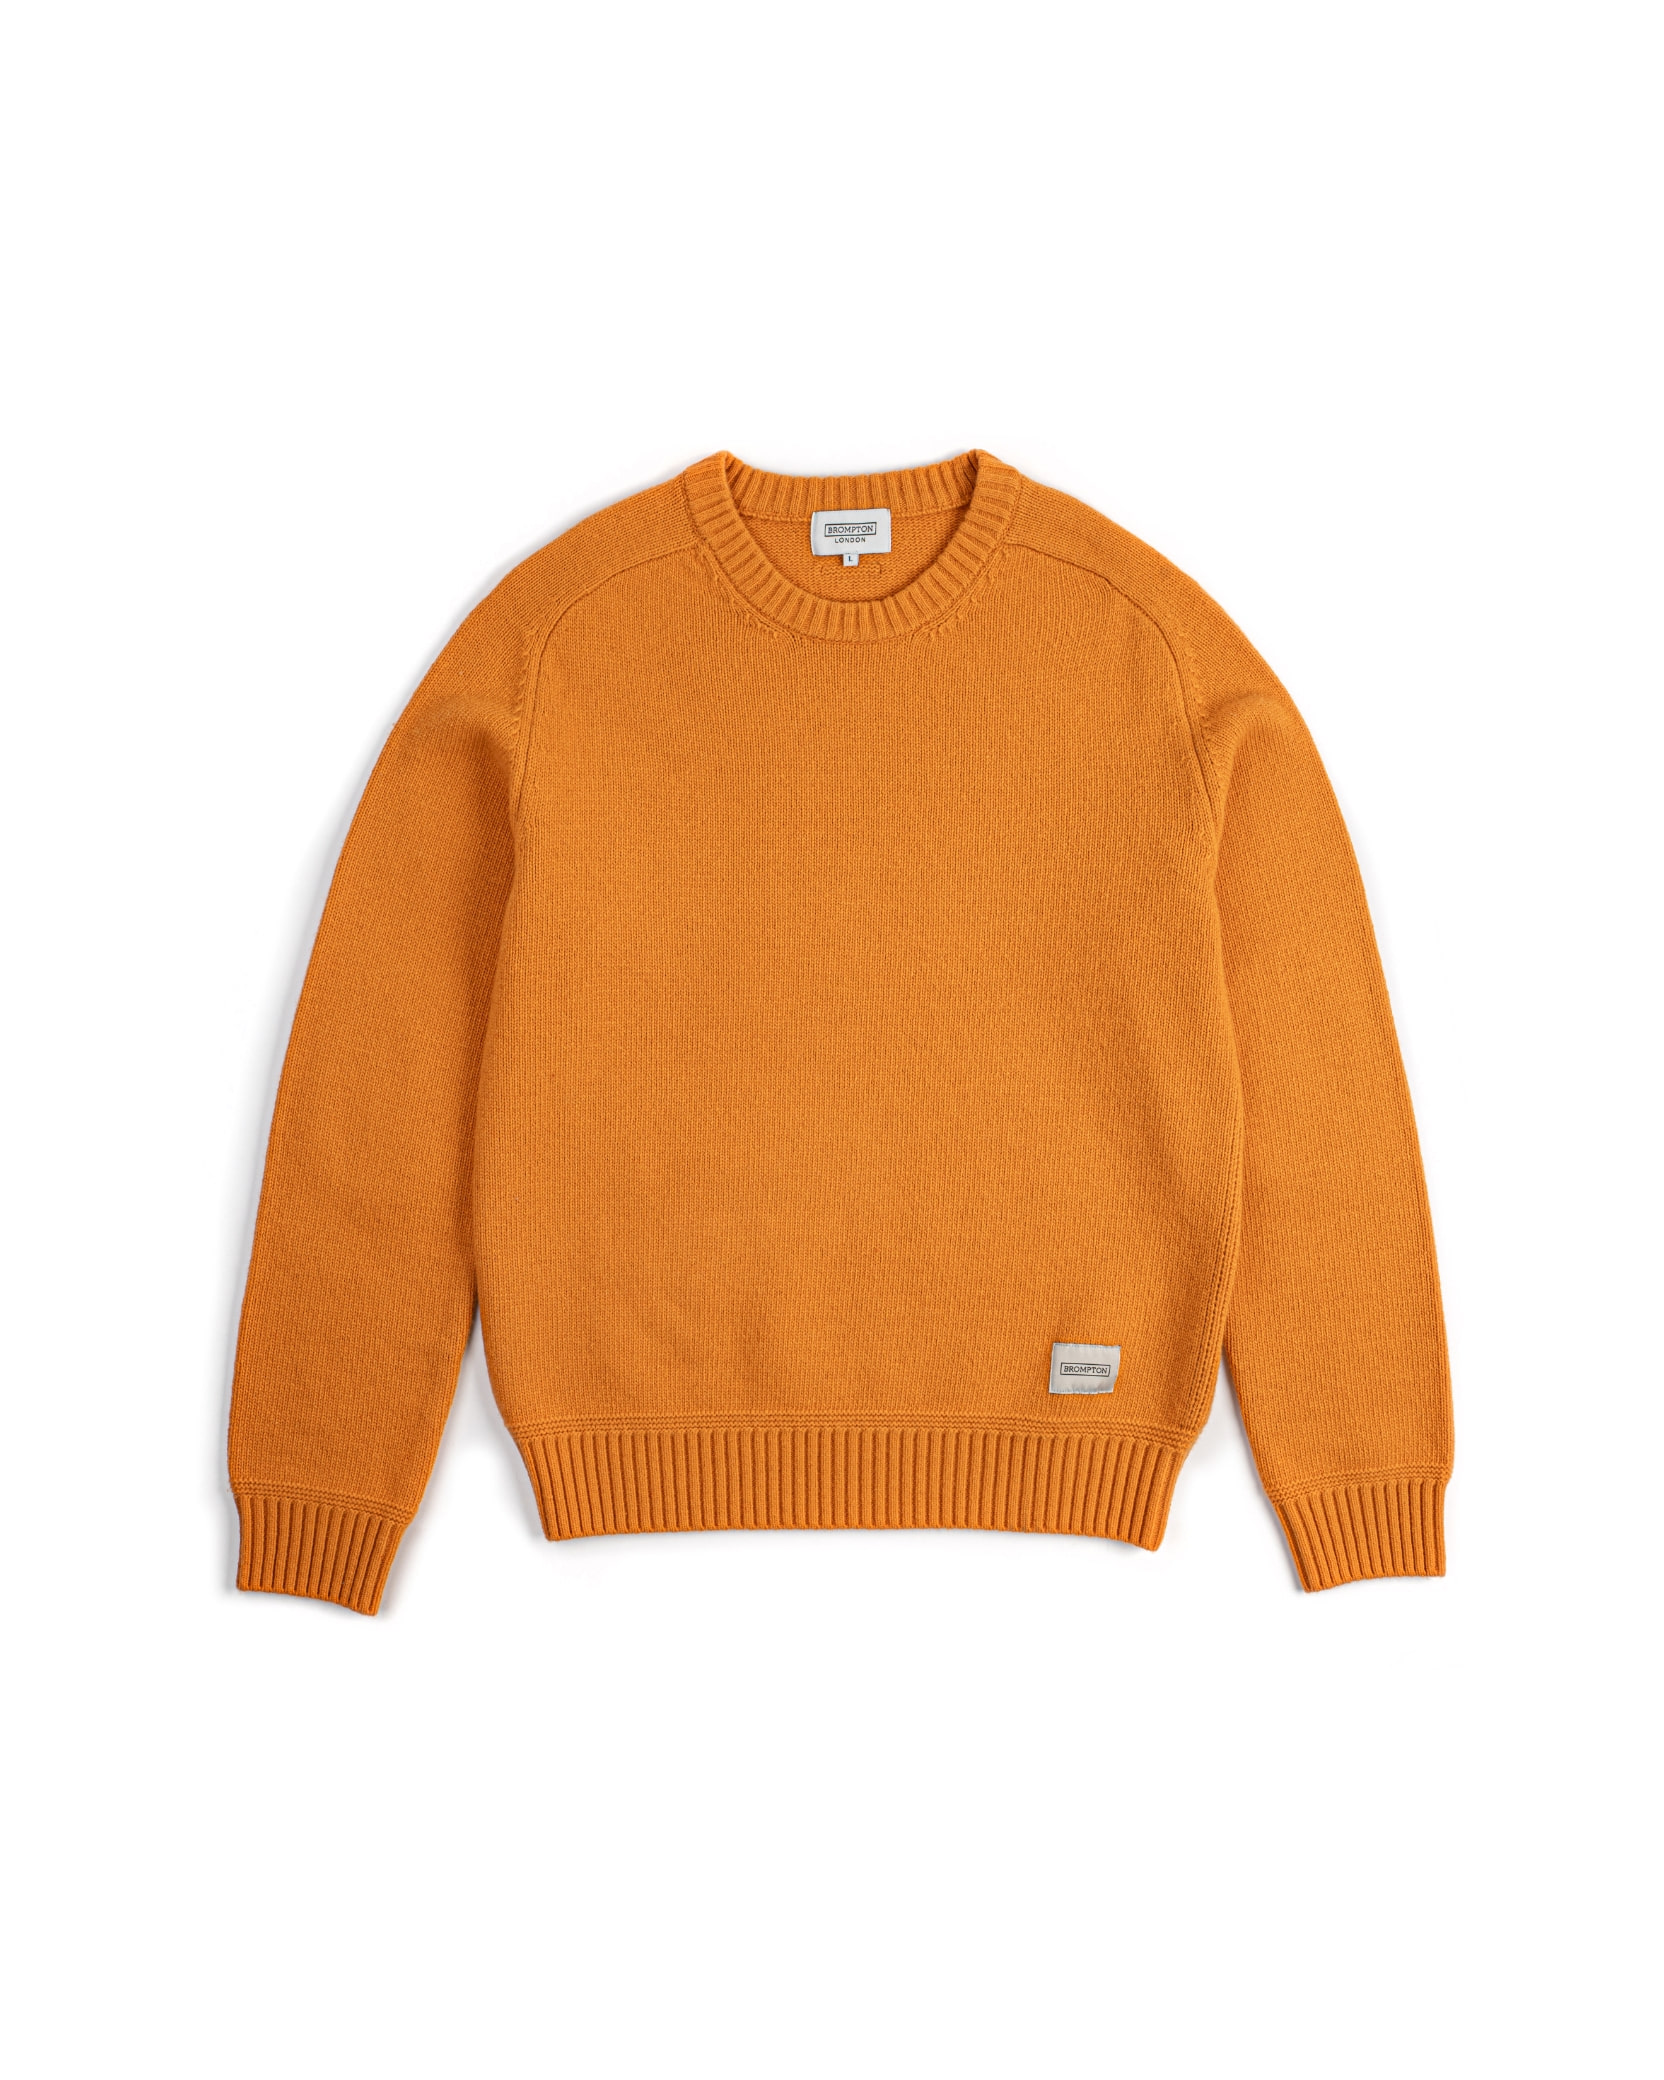 WOOL BLENDED ELBOW PATCH ROUND SWEATER - ORANGE